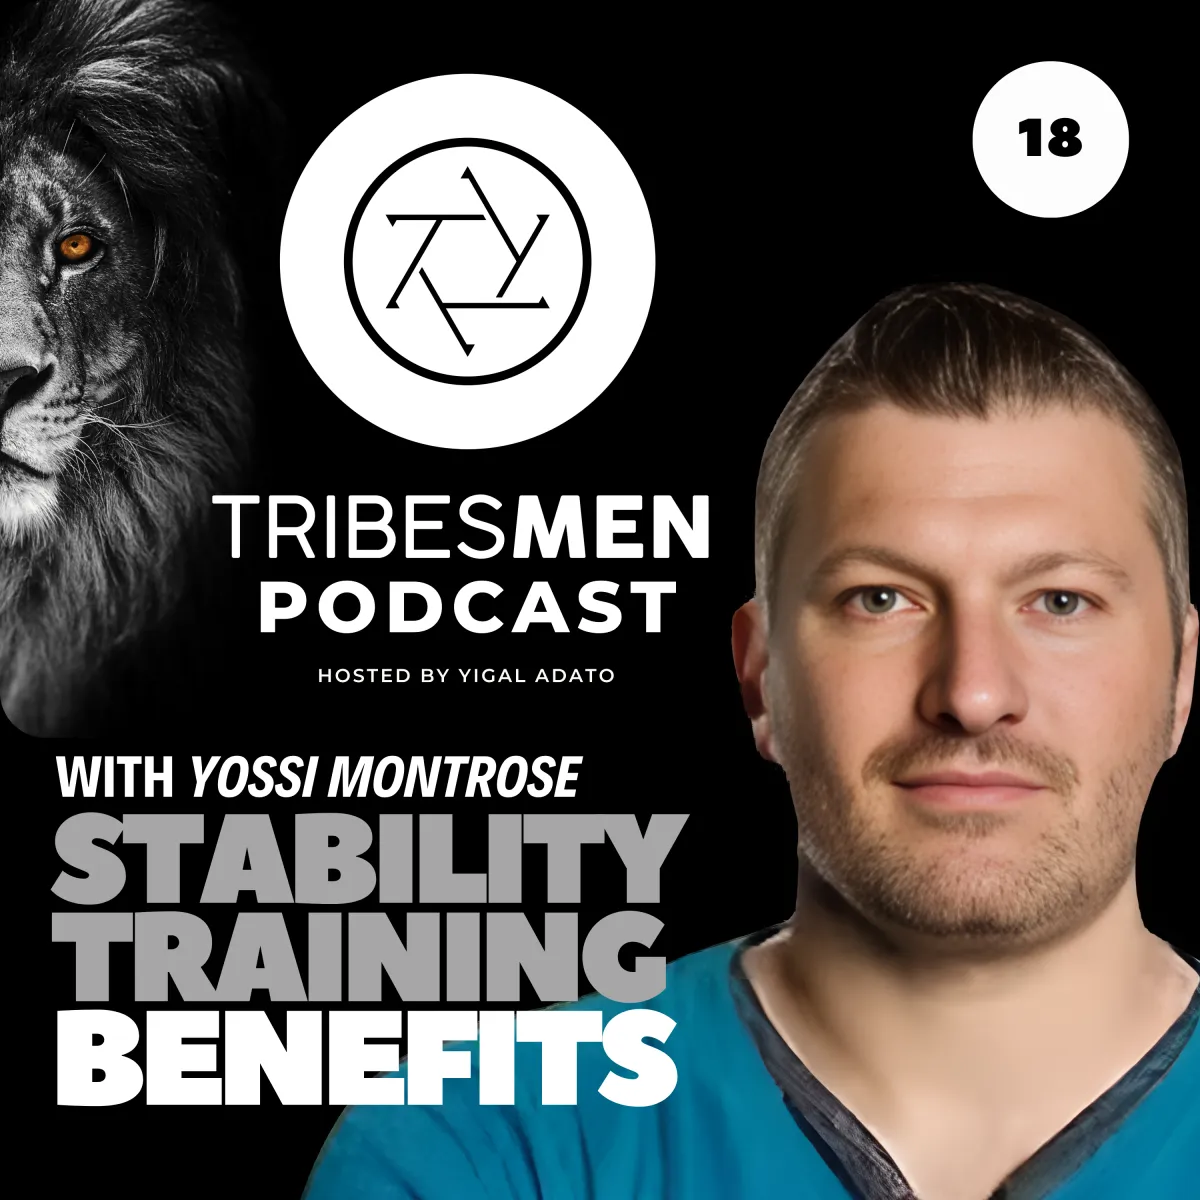 Tribesmen Podcast Episode 18 with Yossi Montrose